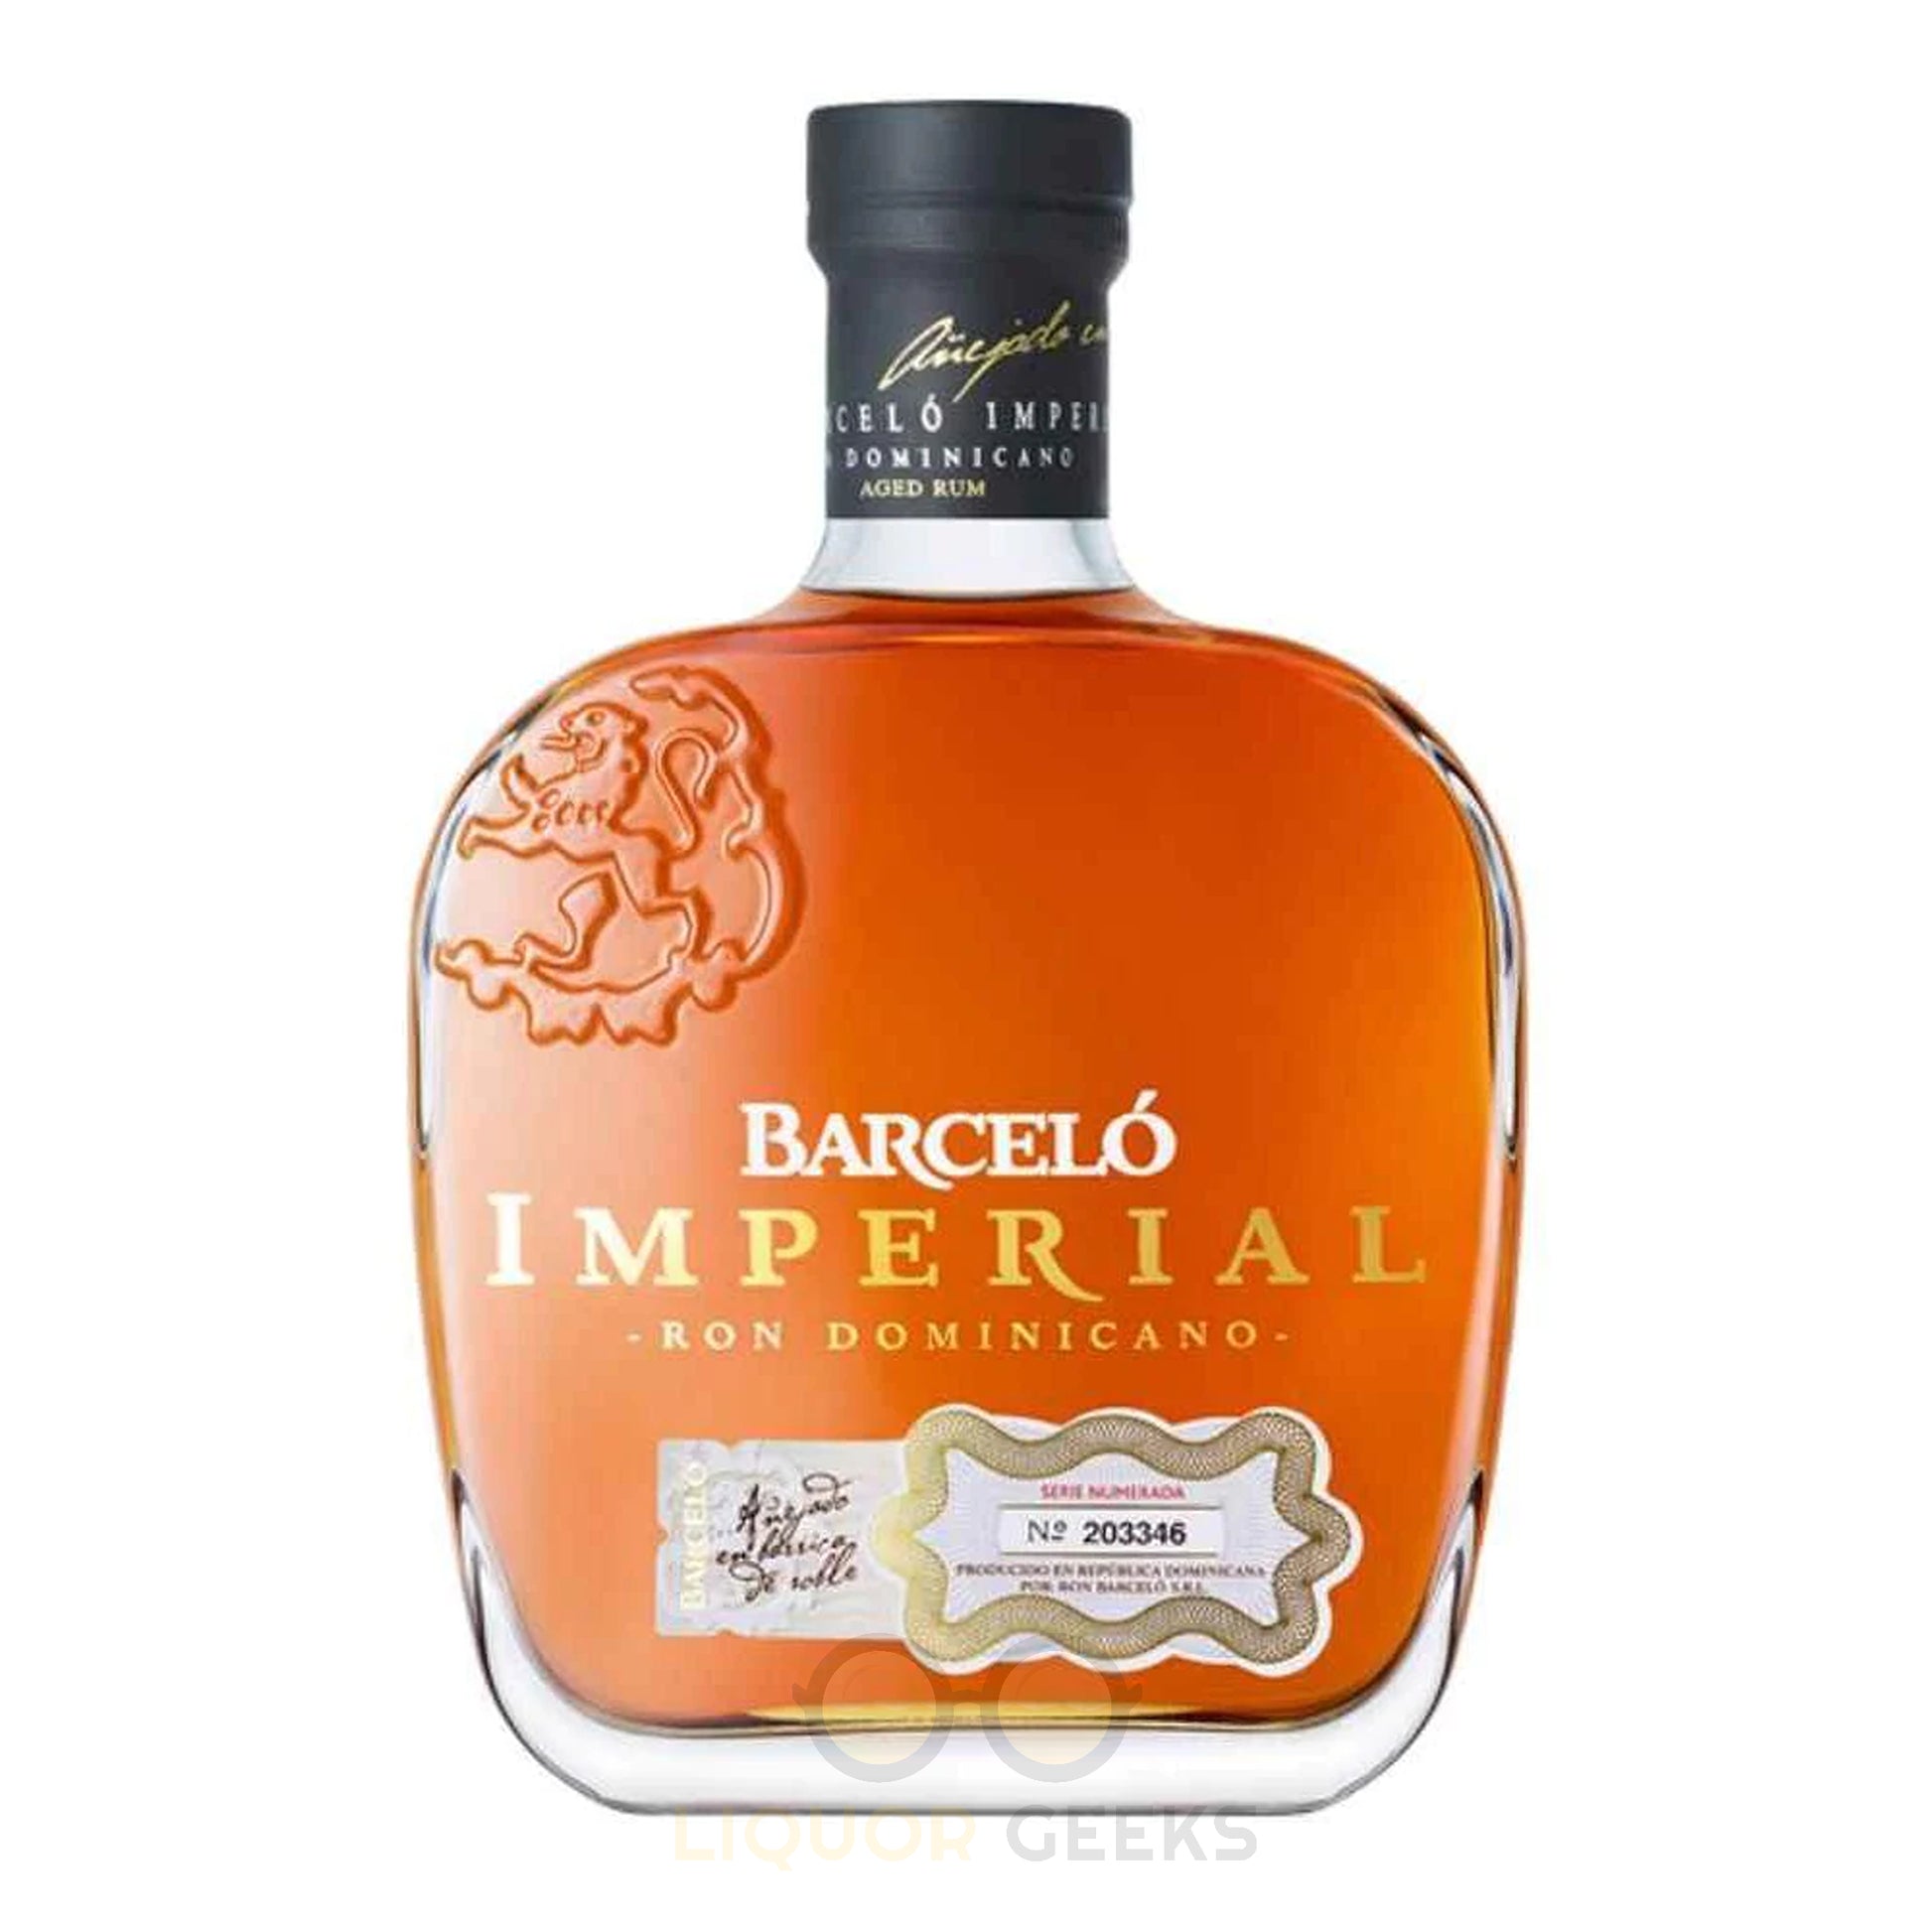 Ron Barcelo Gold Rum Imperial